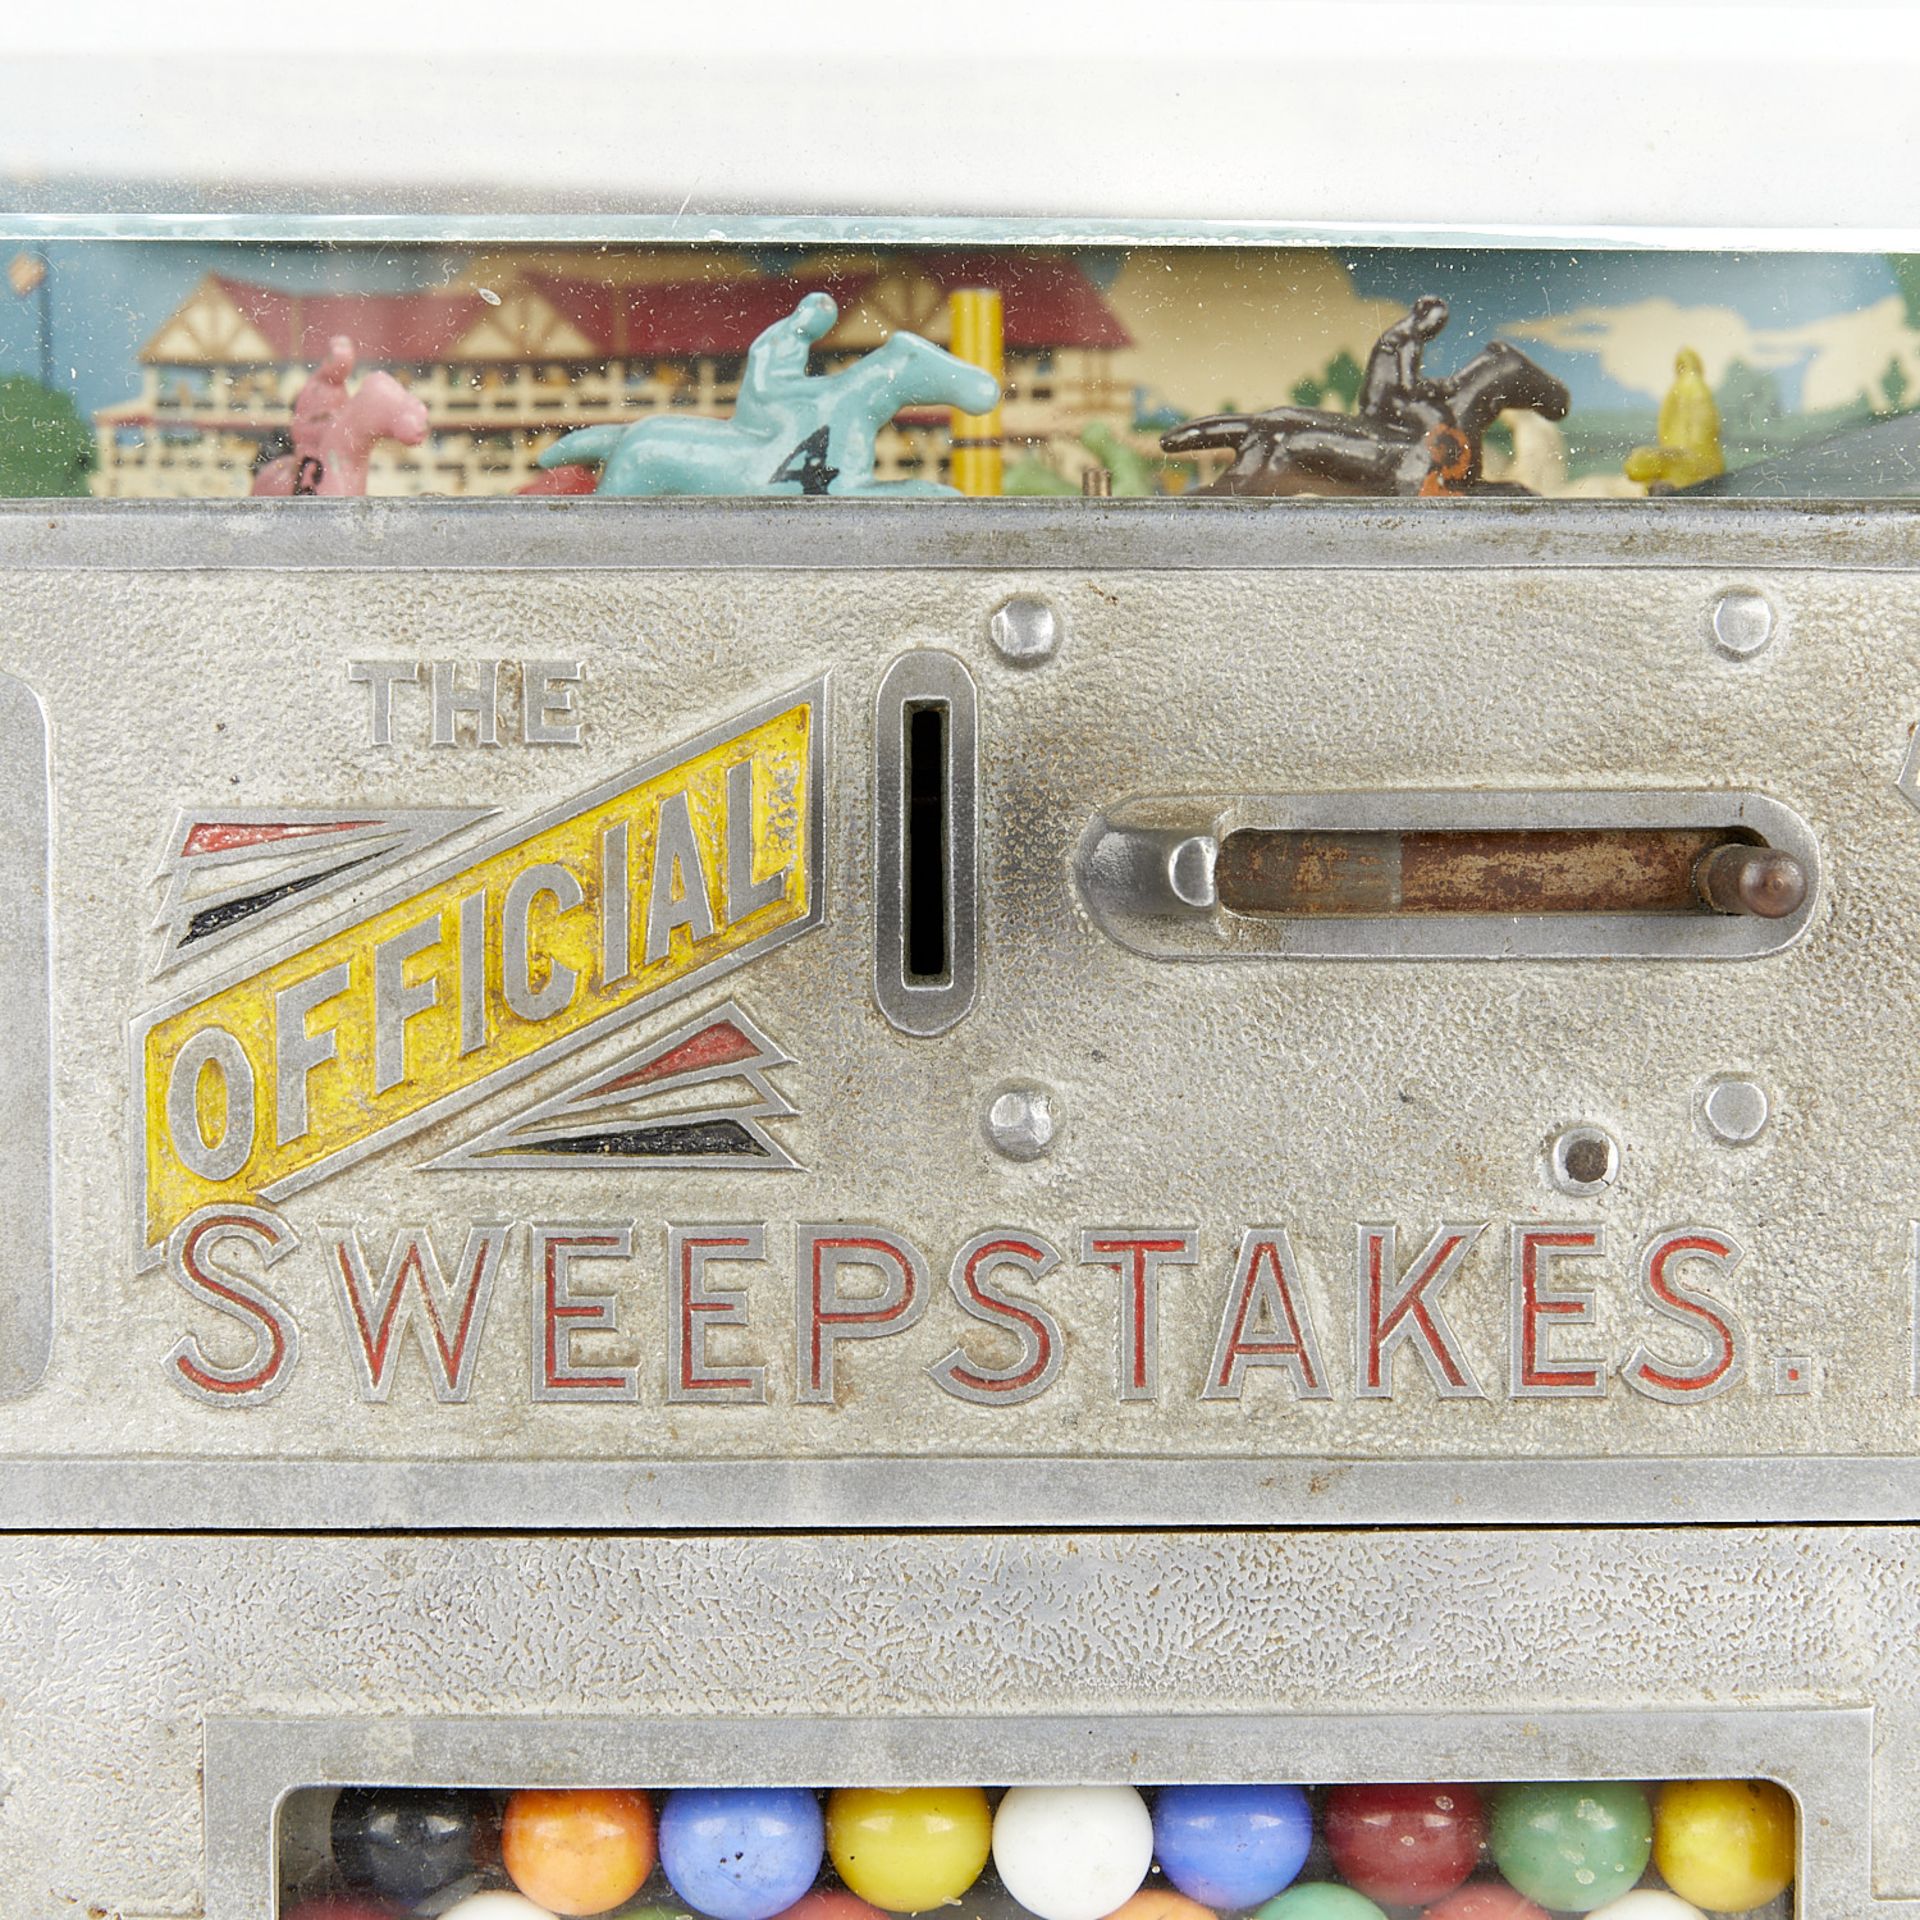 One Cent Rock-Ola "Sweepstakes" Arcade Game - Image 10 of 15